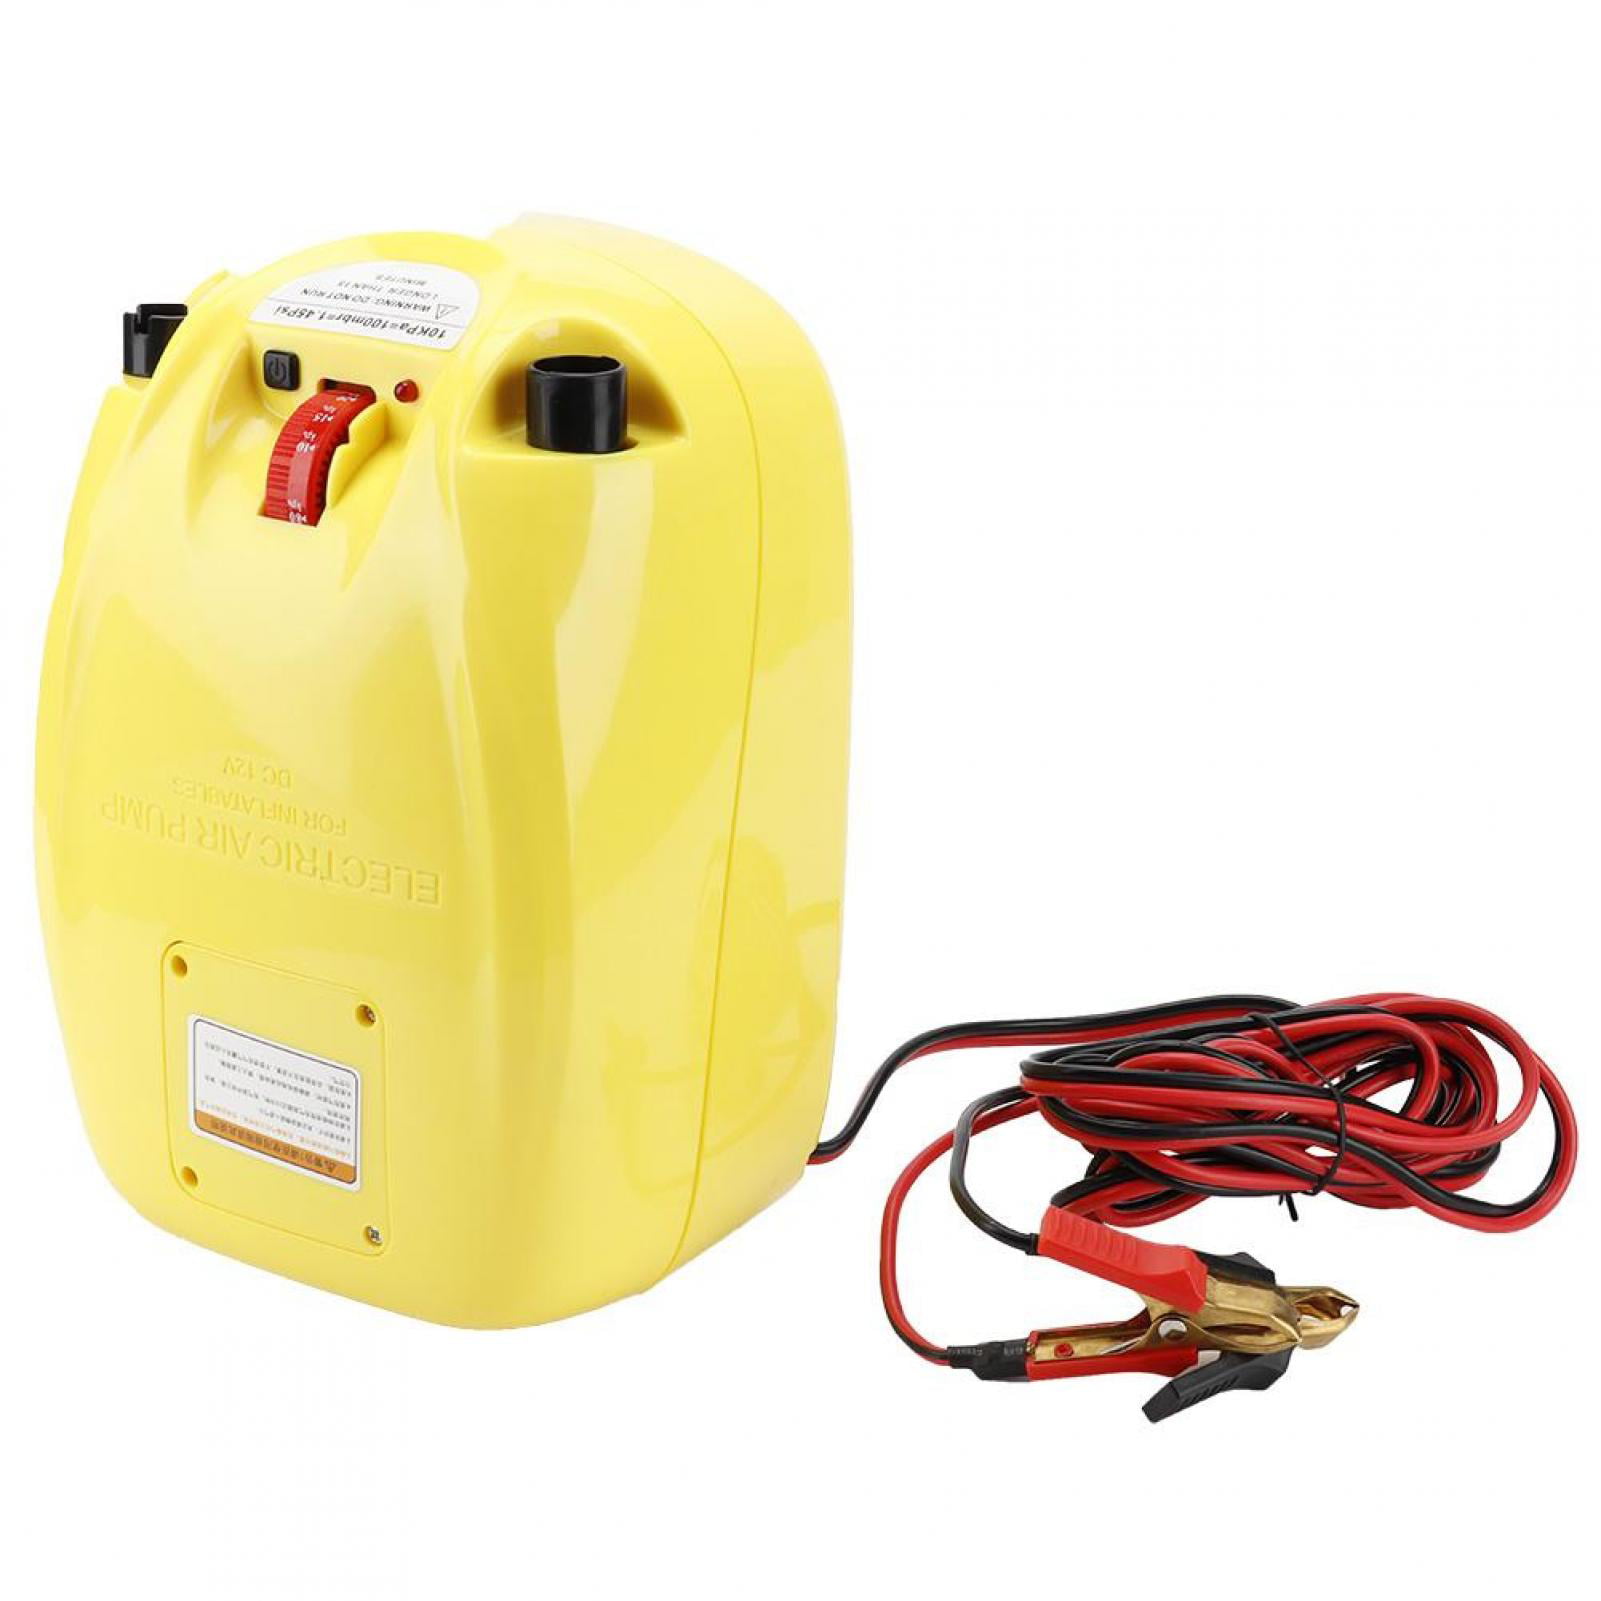 12V Portable Electric Air Pump for Inflatable Canoe Boats Rafts Kayaks kites